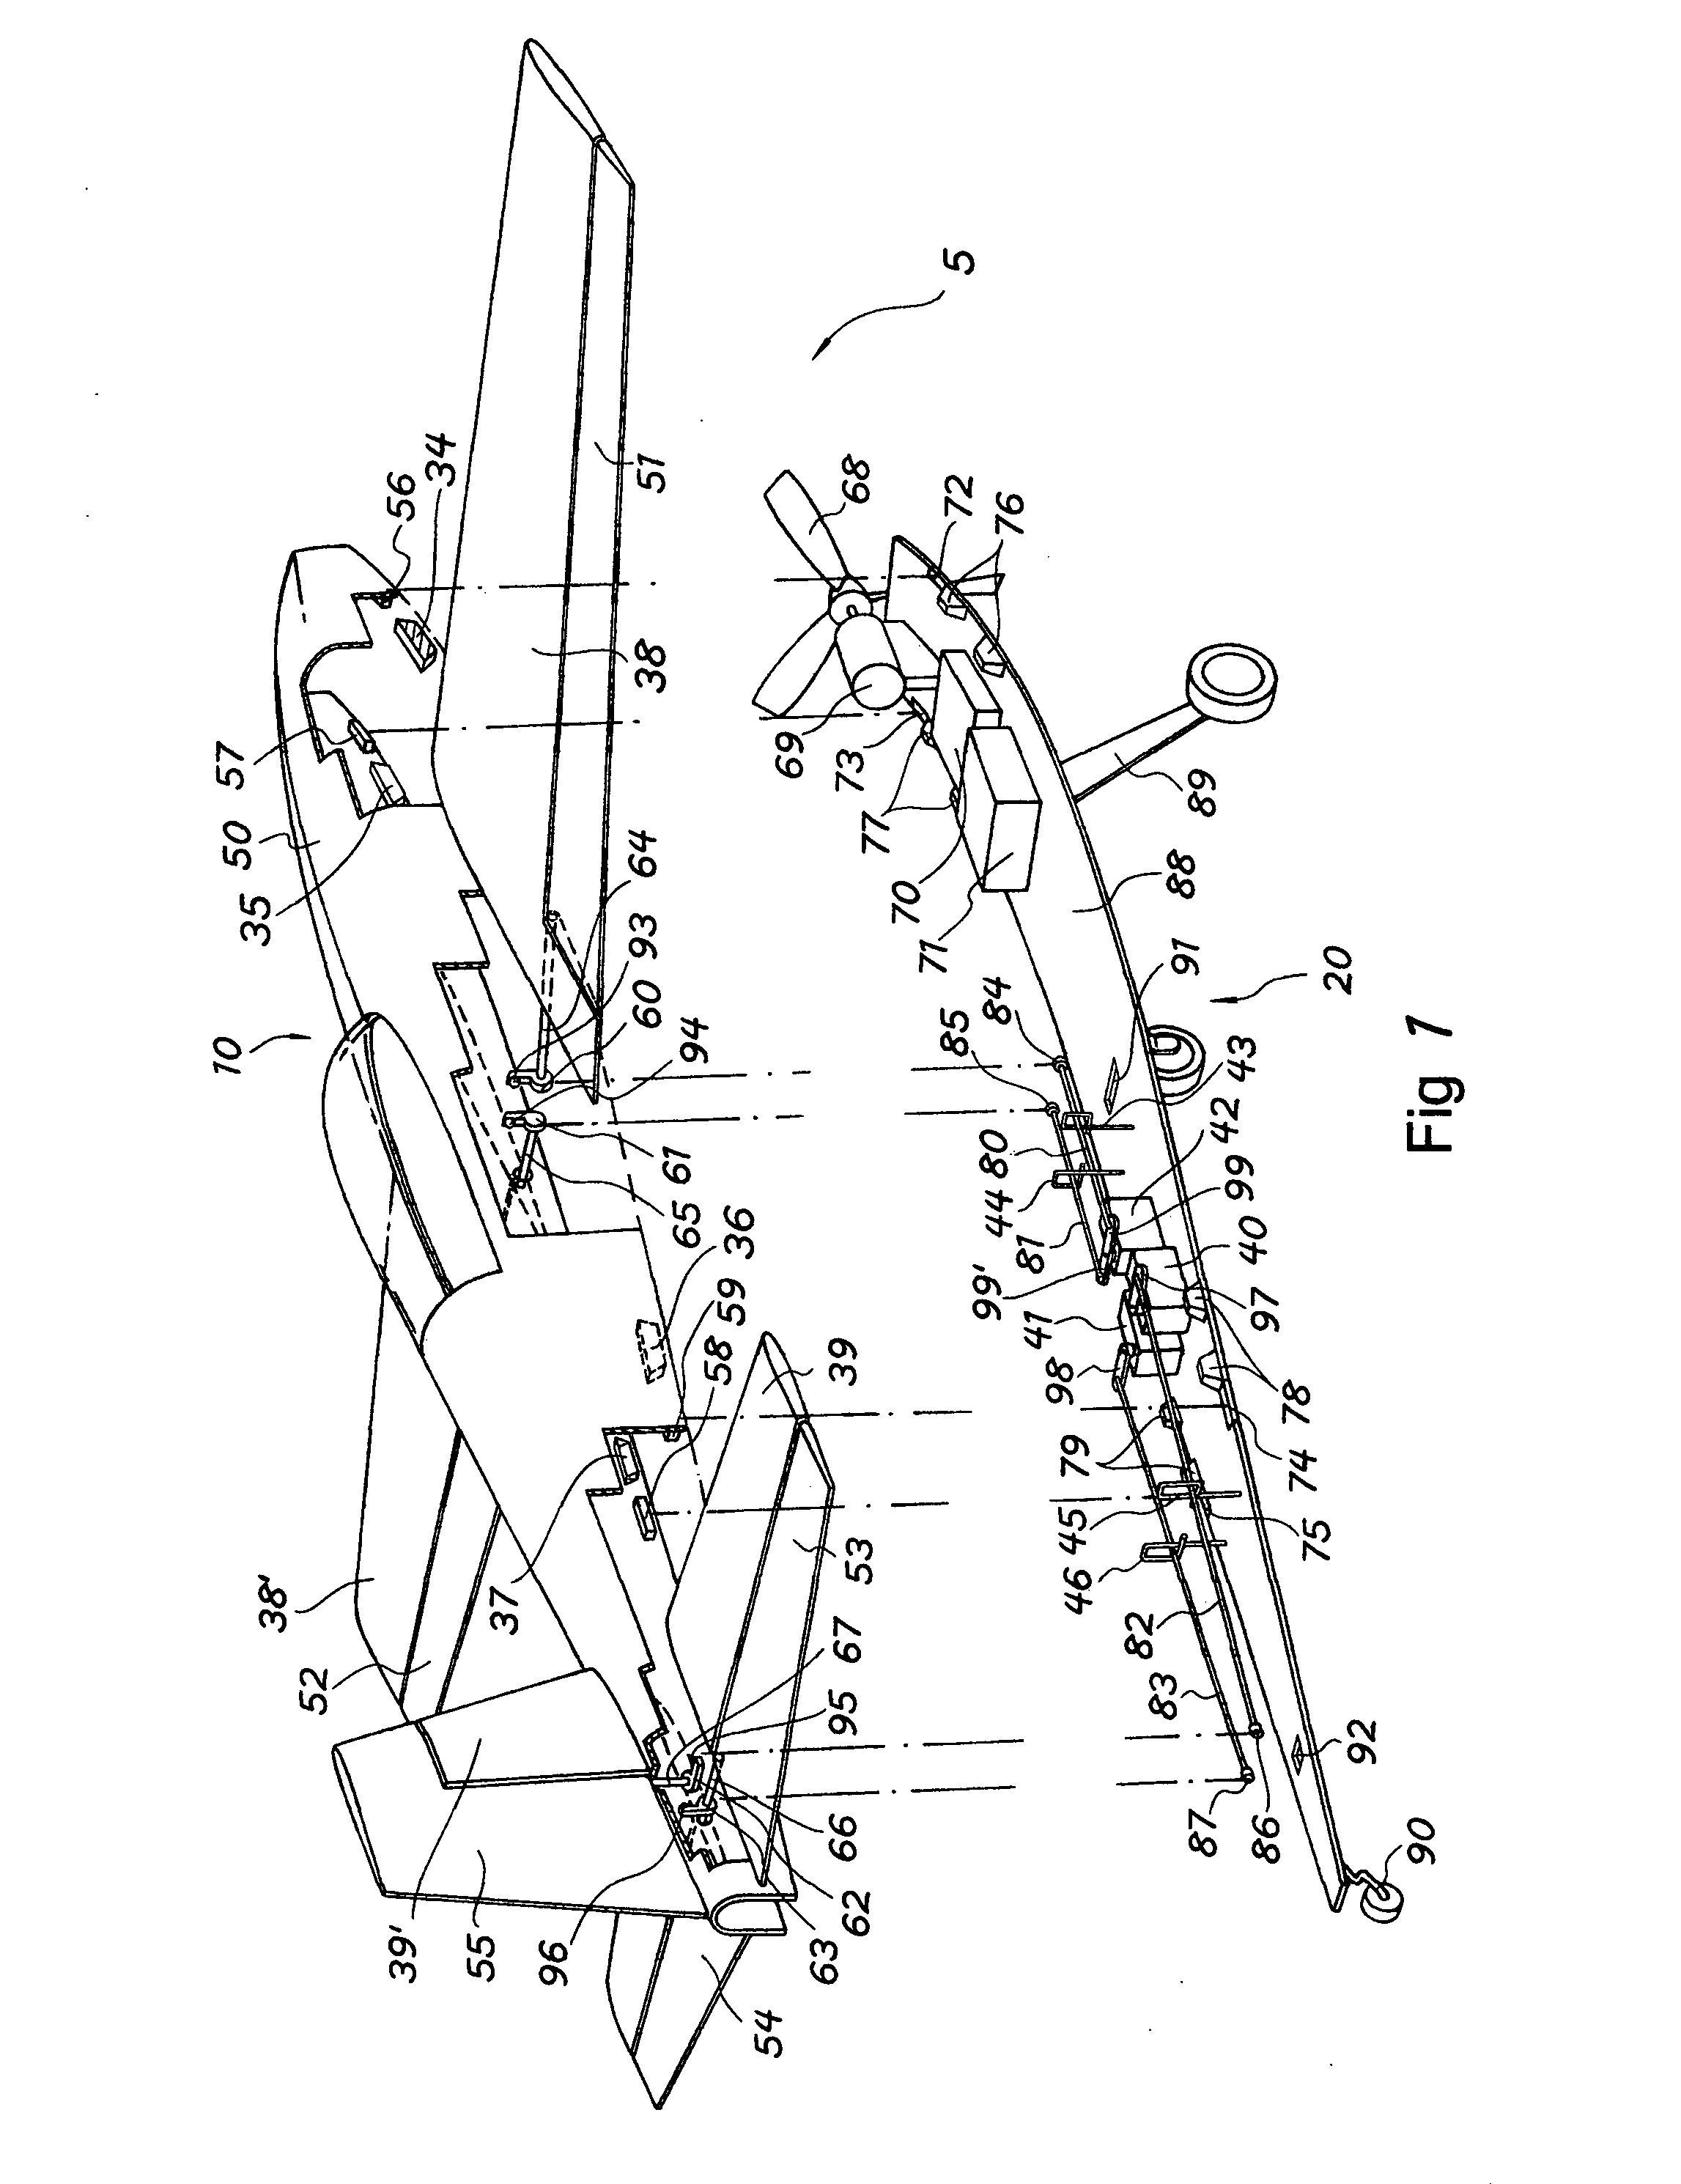 Modularized airplane structures and methods